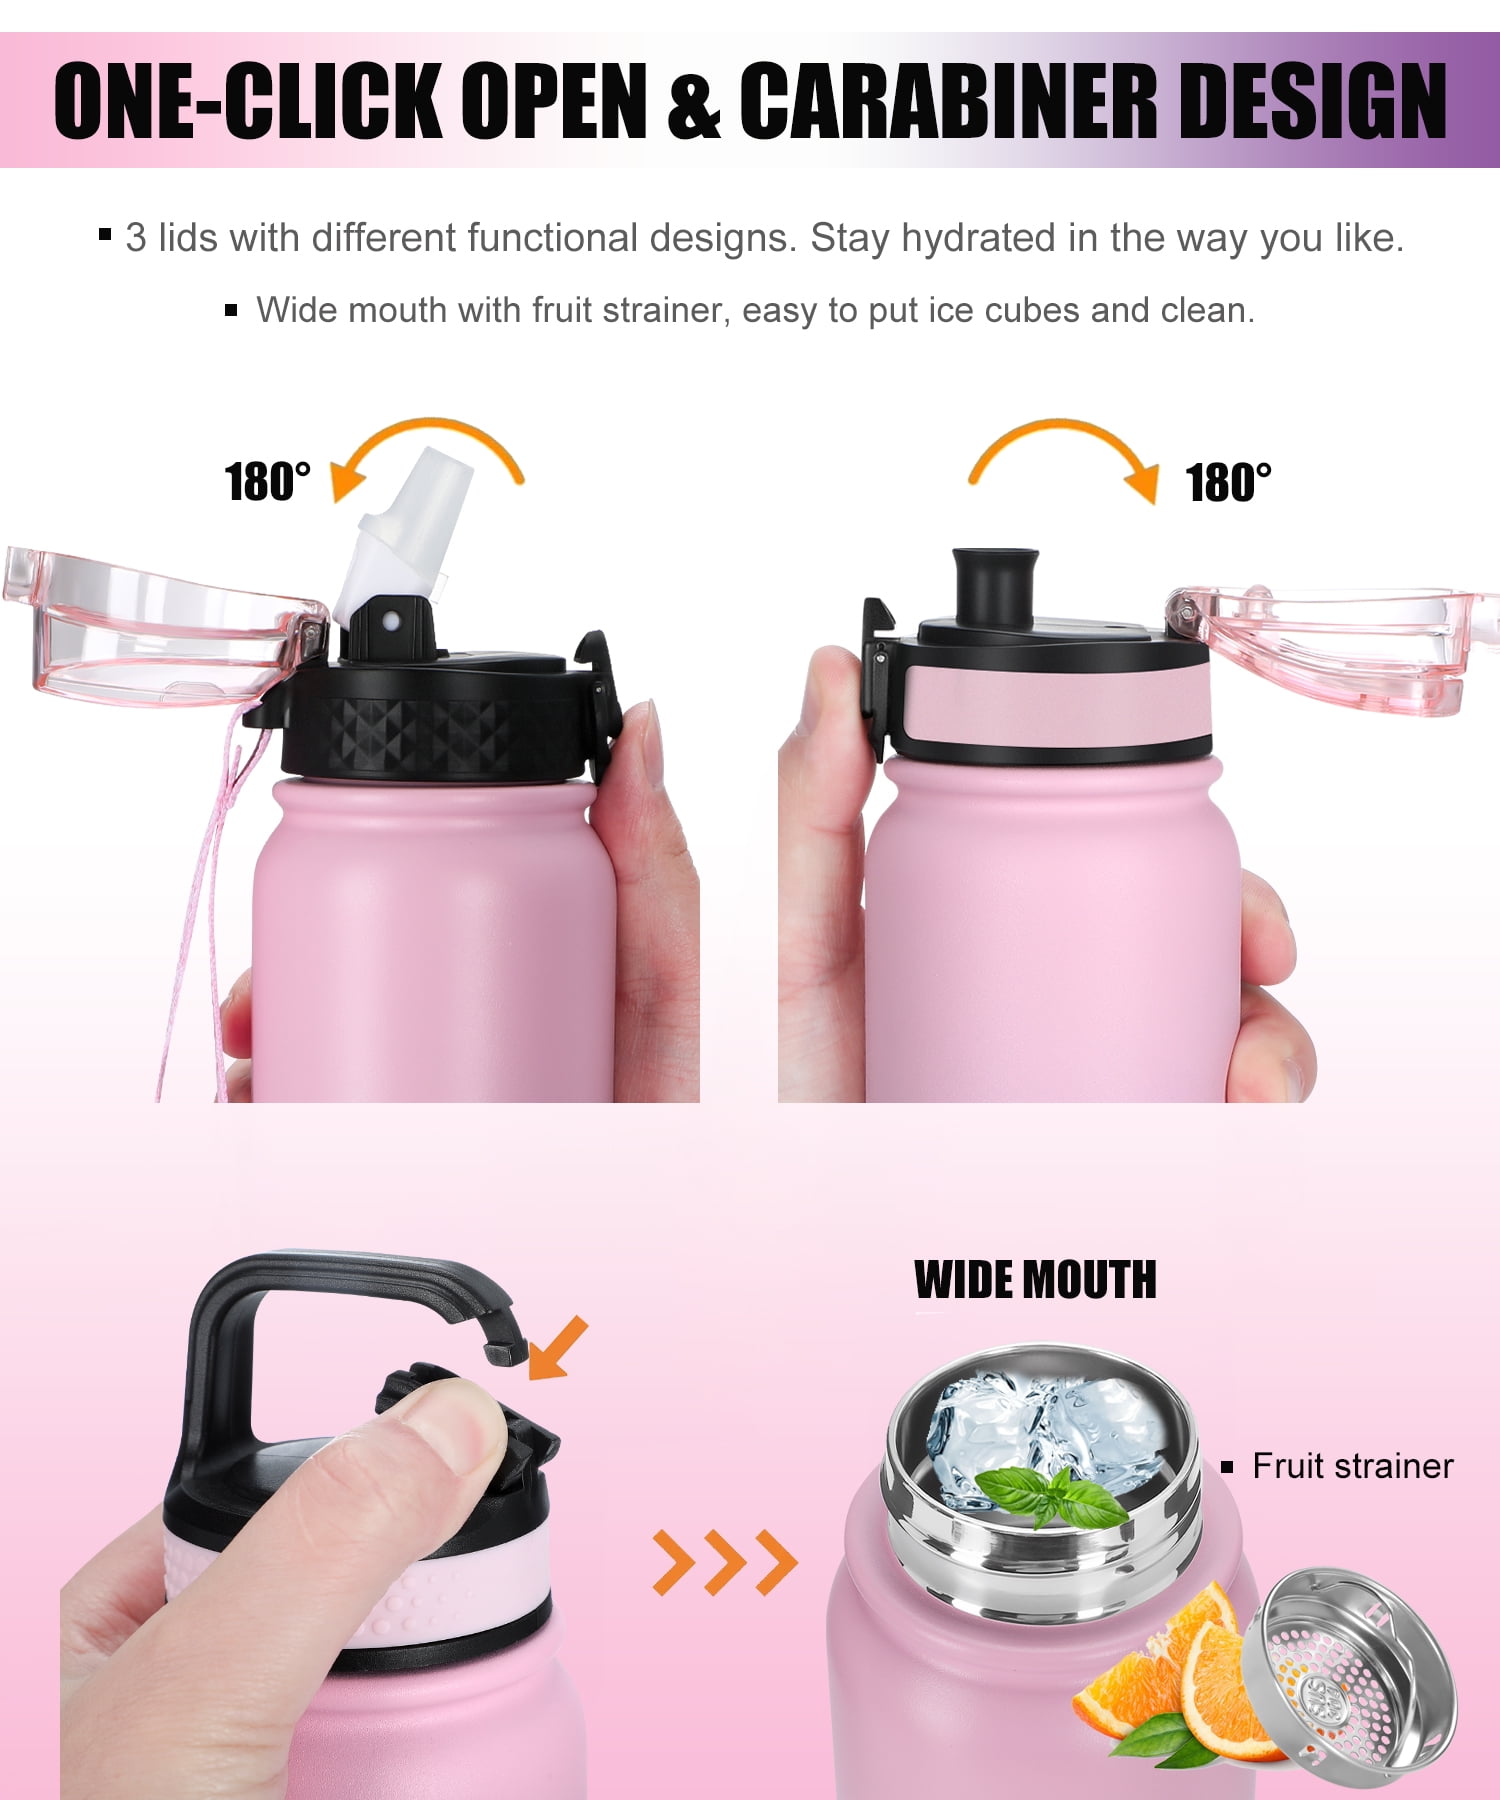 Oldley Insulated Water Bottle 20oz For aldults and Kids Girl with  Straw,Chug,Carabiner 3 Lids Double Wall Vacuum Wide Mouth BPA Free  Sweat,LeakProof for School Travel,Gift,Pink Purple 